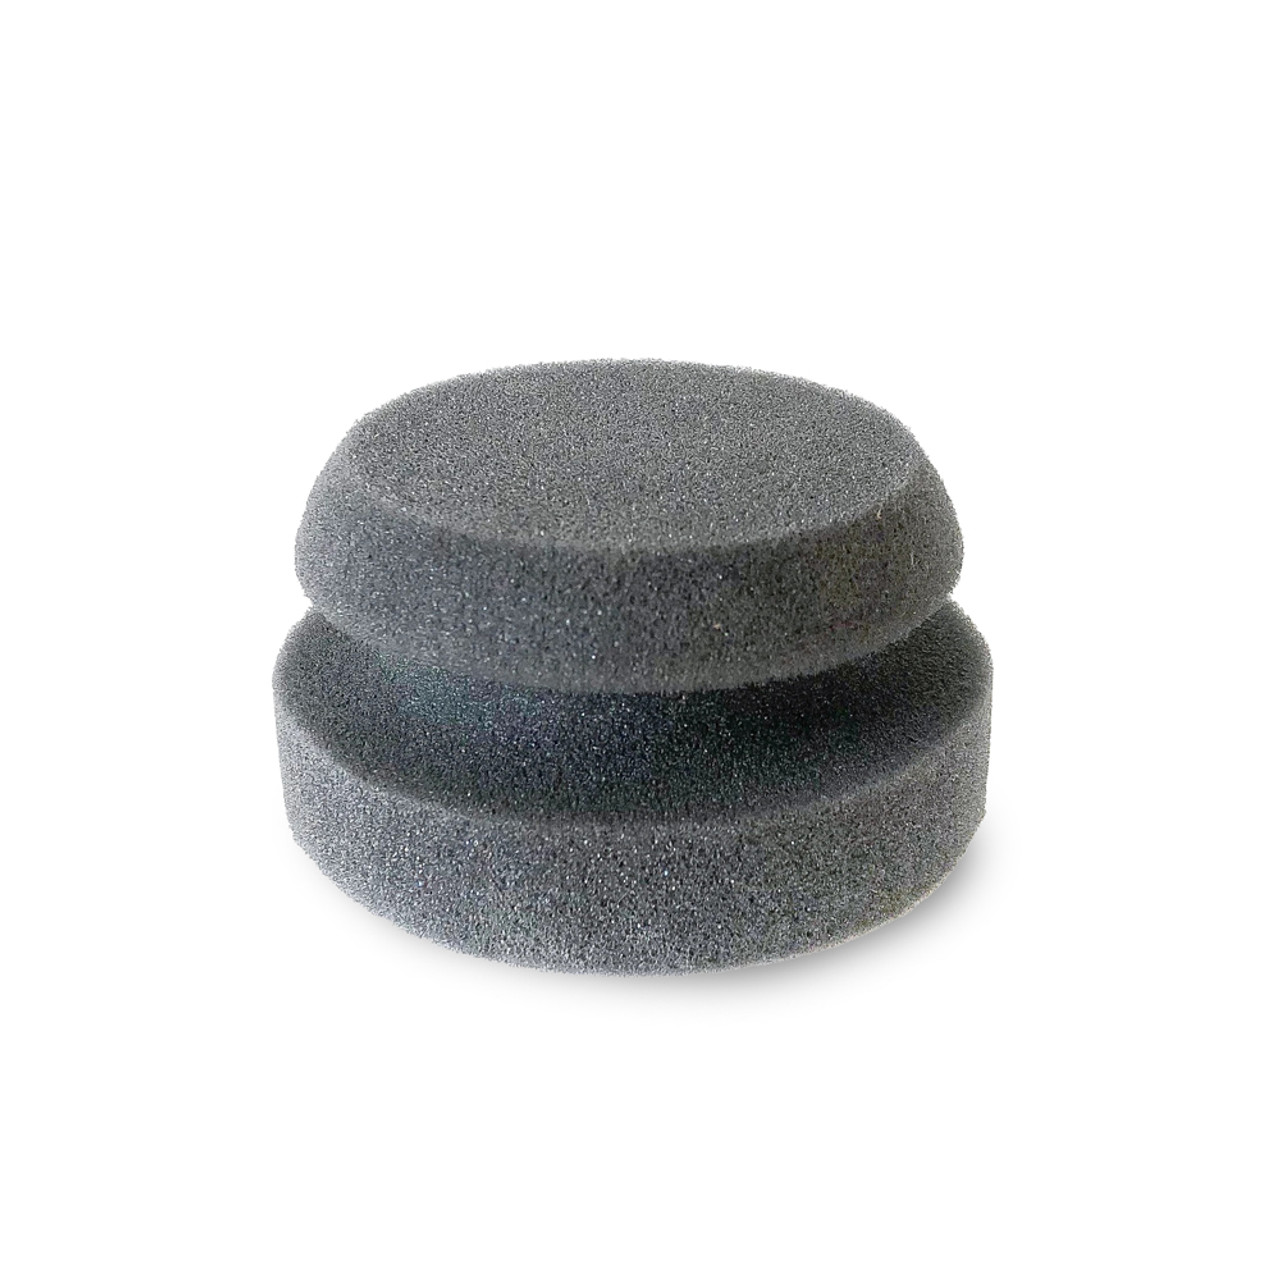 Chalk Style Painting Sponges - Set of 3 Reusable Applicator Sponges for  Smooth Furniture Paint & Top Coat Application